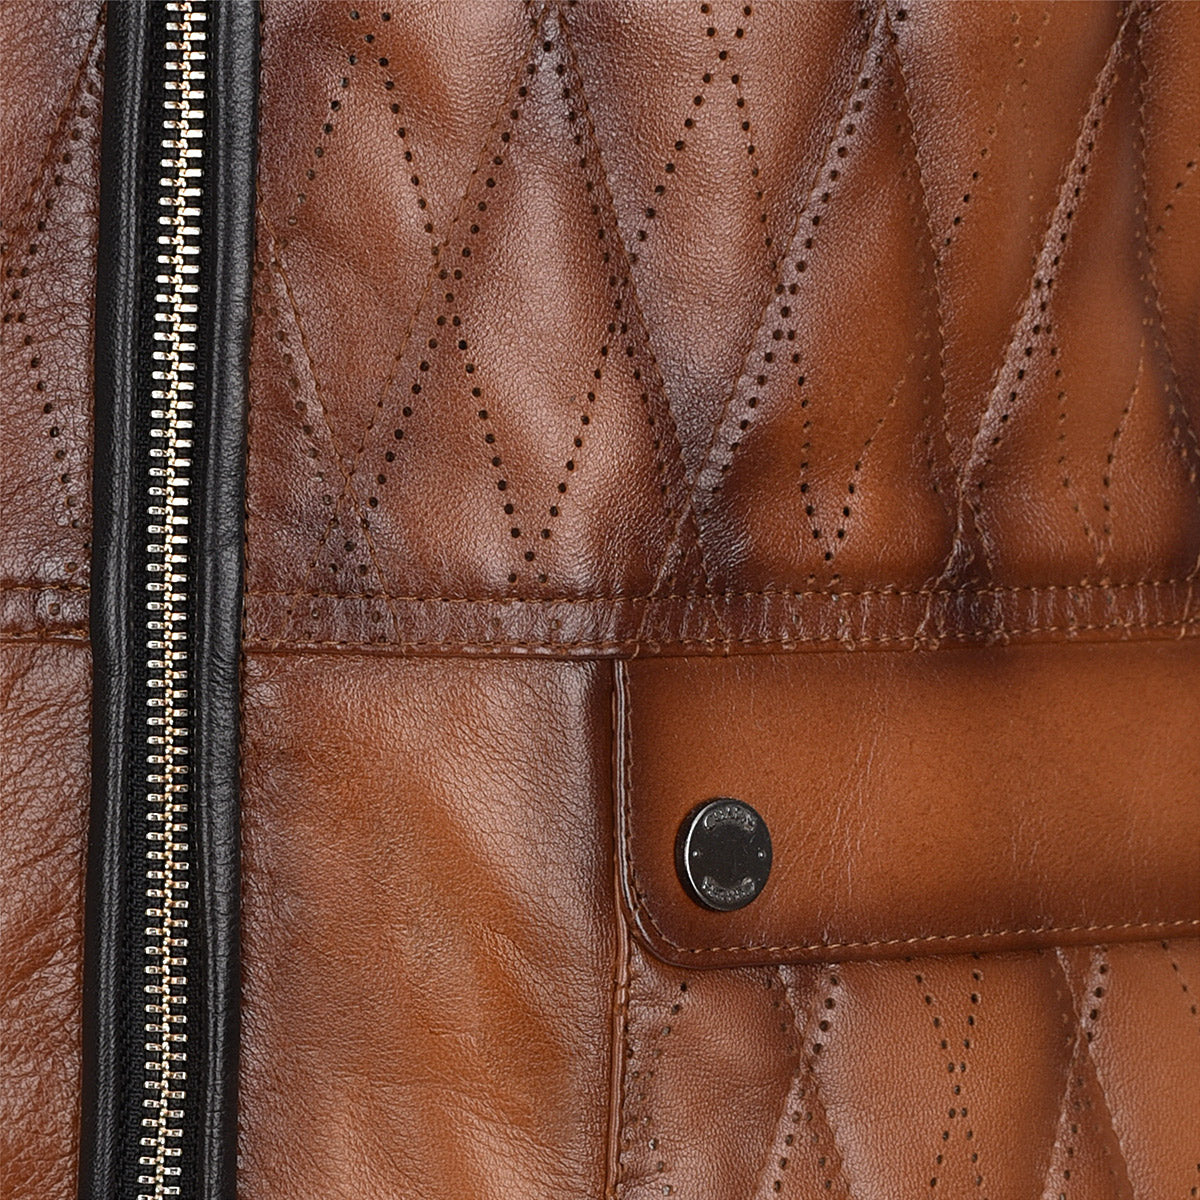 Mens doble view brown leather vest